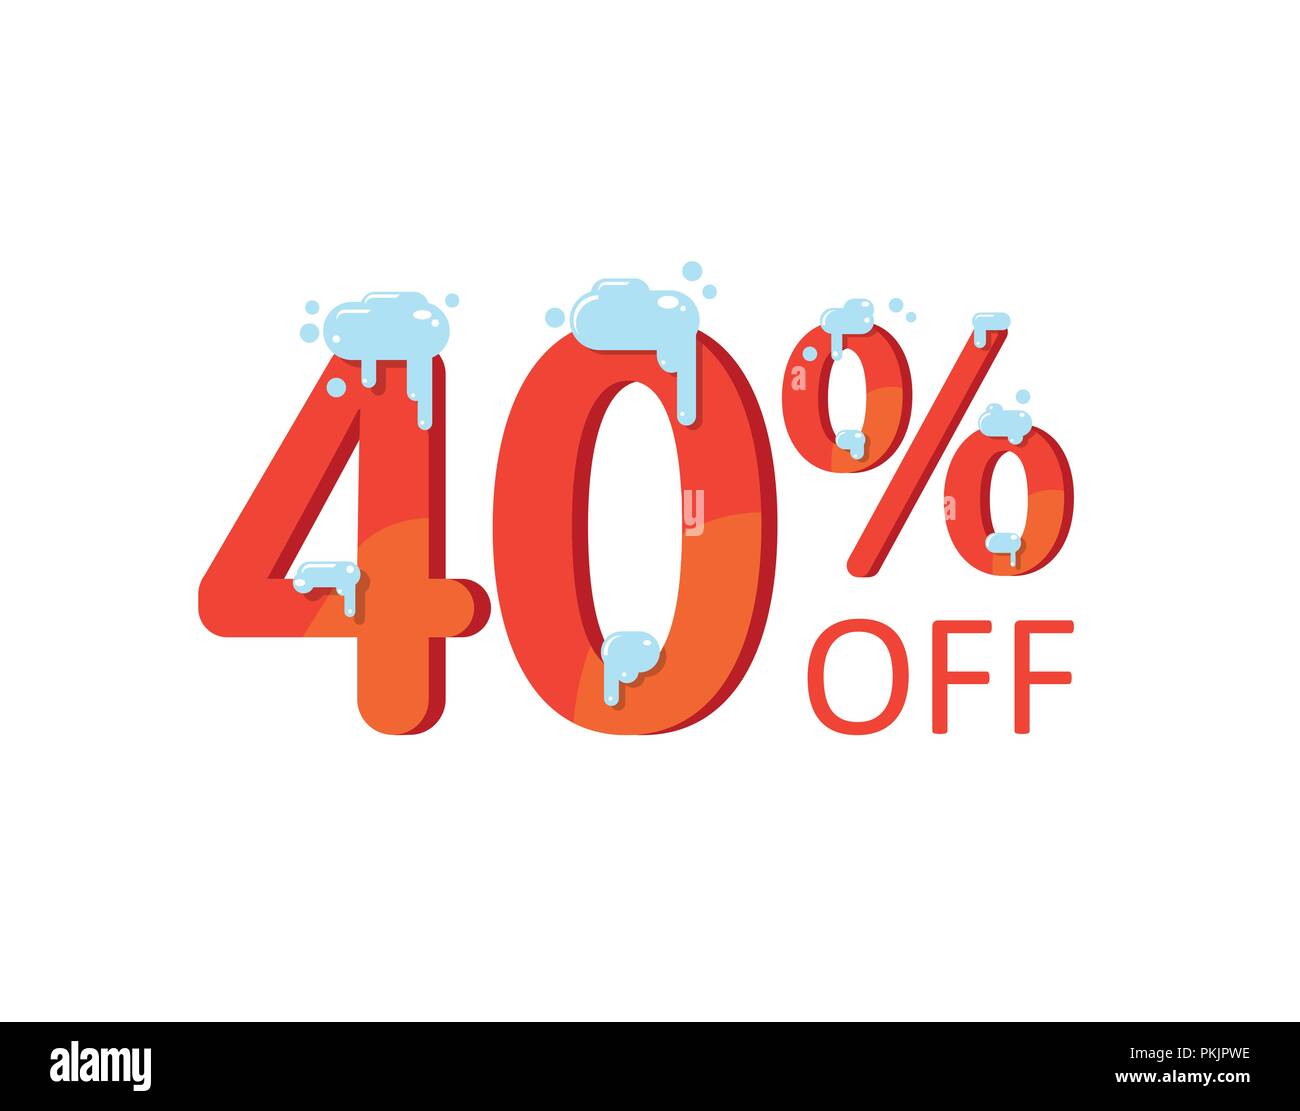 Price Tag 40 Percent Off Stock Photos & Price Tag 40 Percent Off Stock